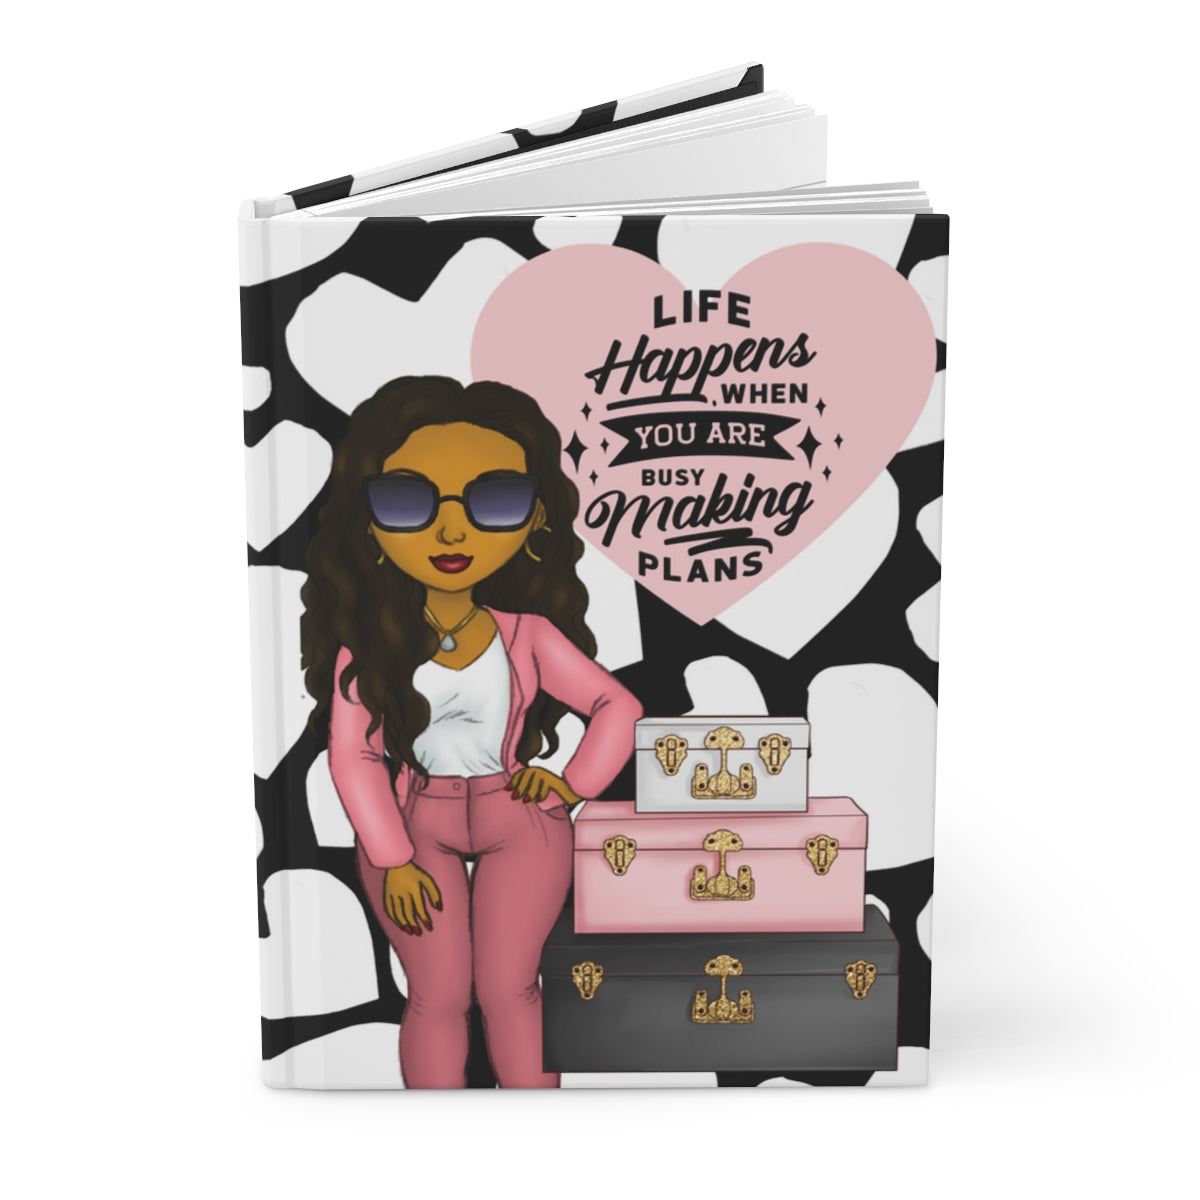 Life Happens When you are Busy Making Plans Hardcover Journal | Travel Journal